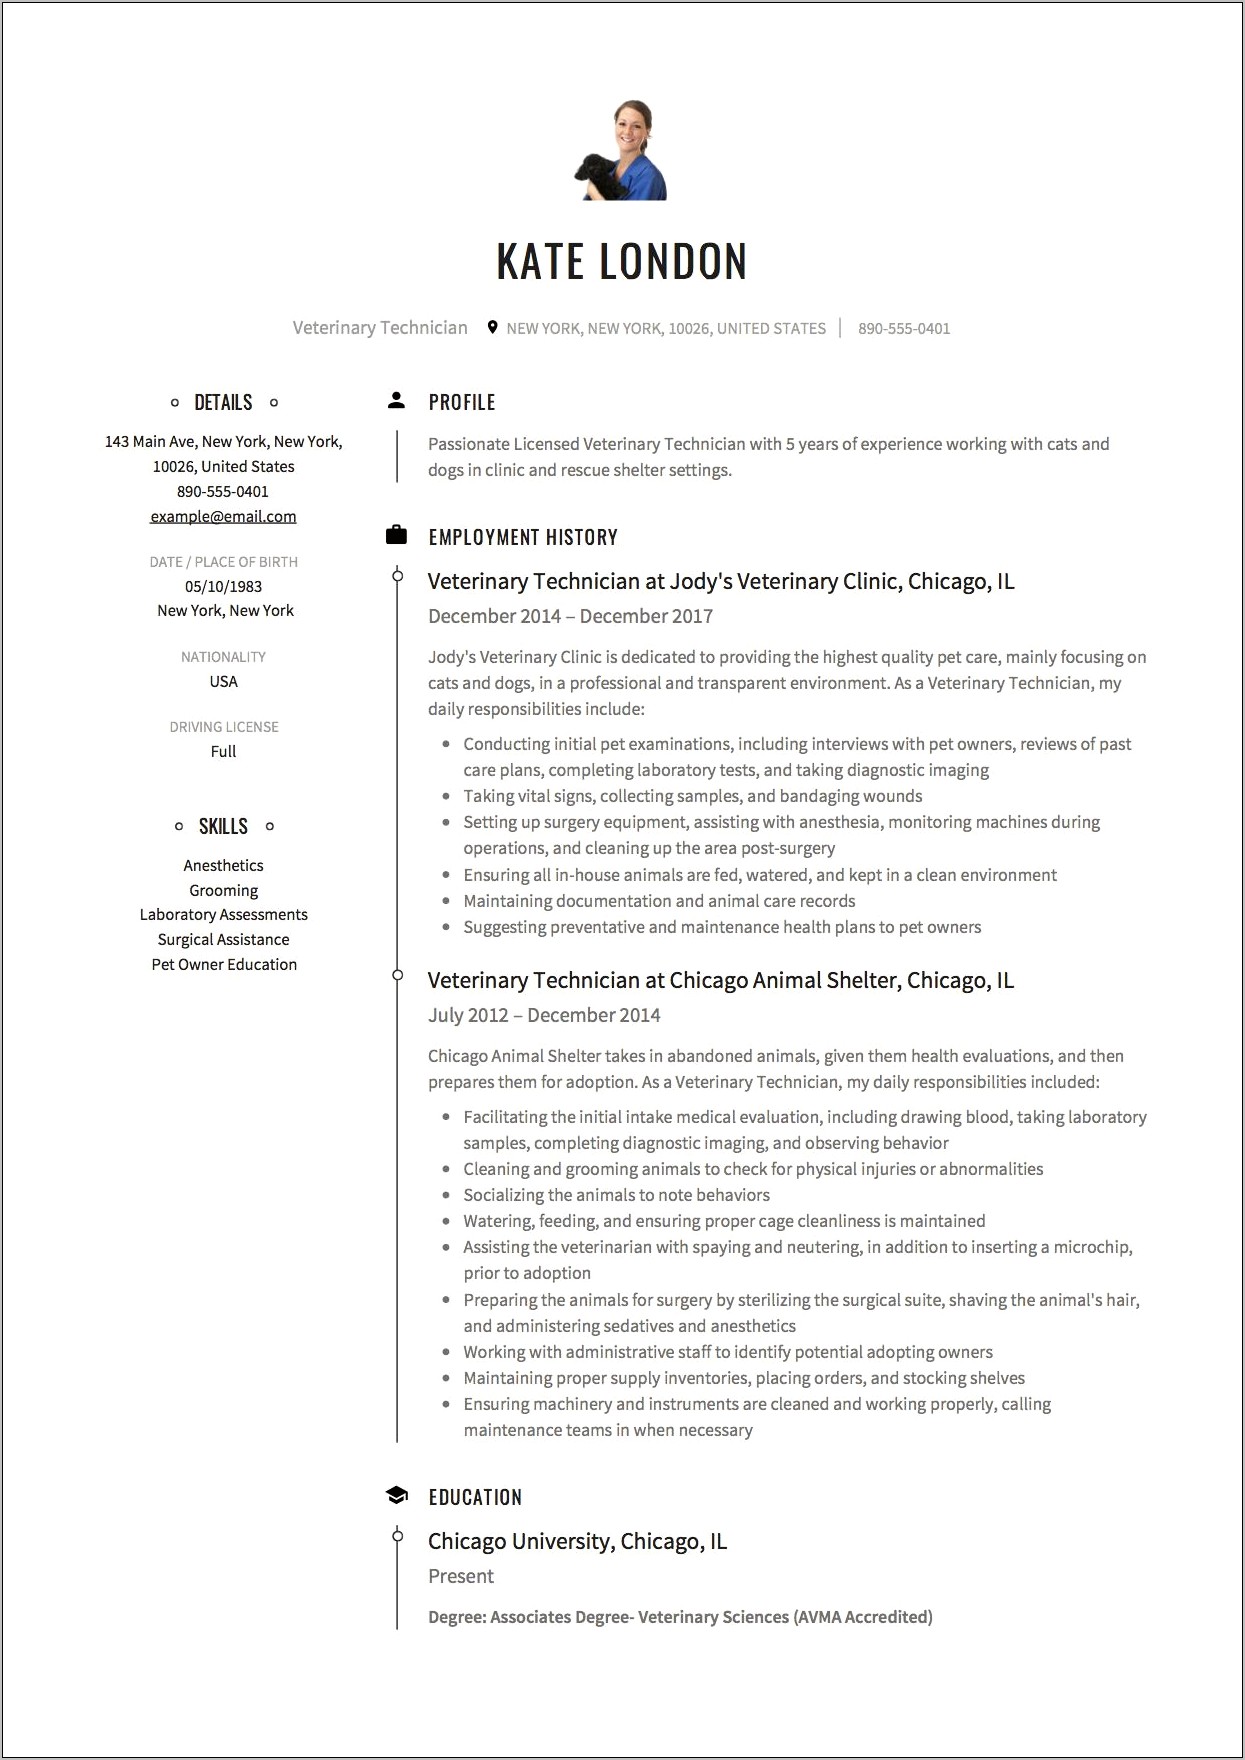 Resume Cover Letter Examples Vet Assistant No Experience